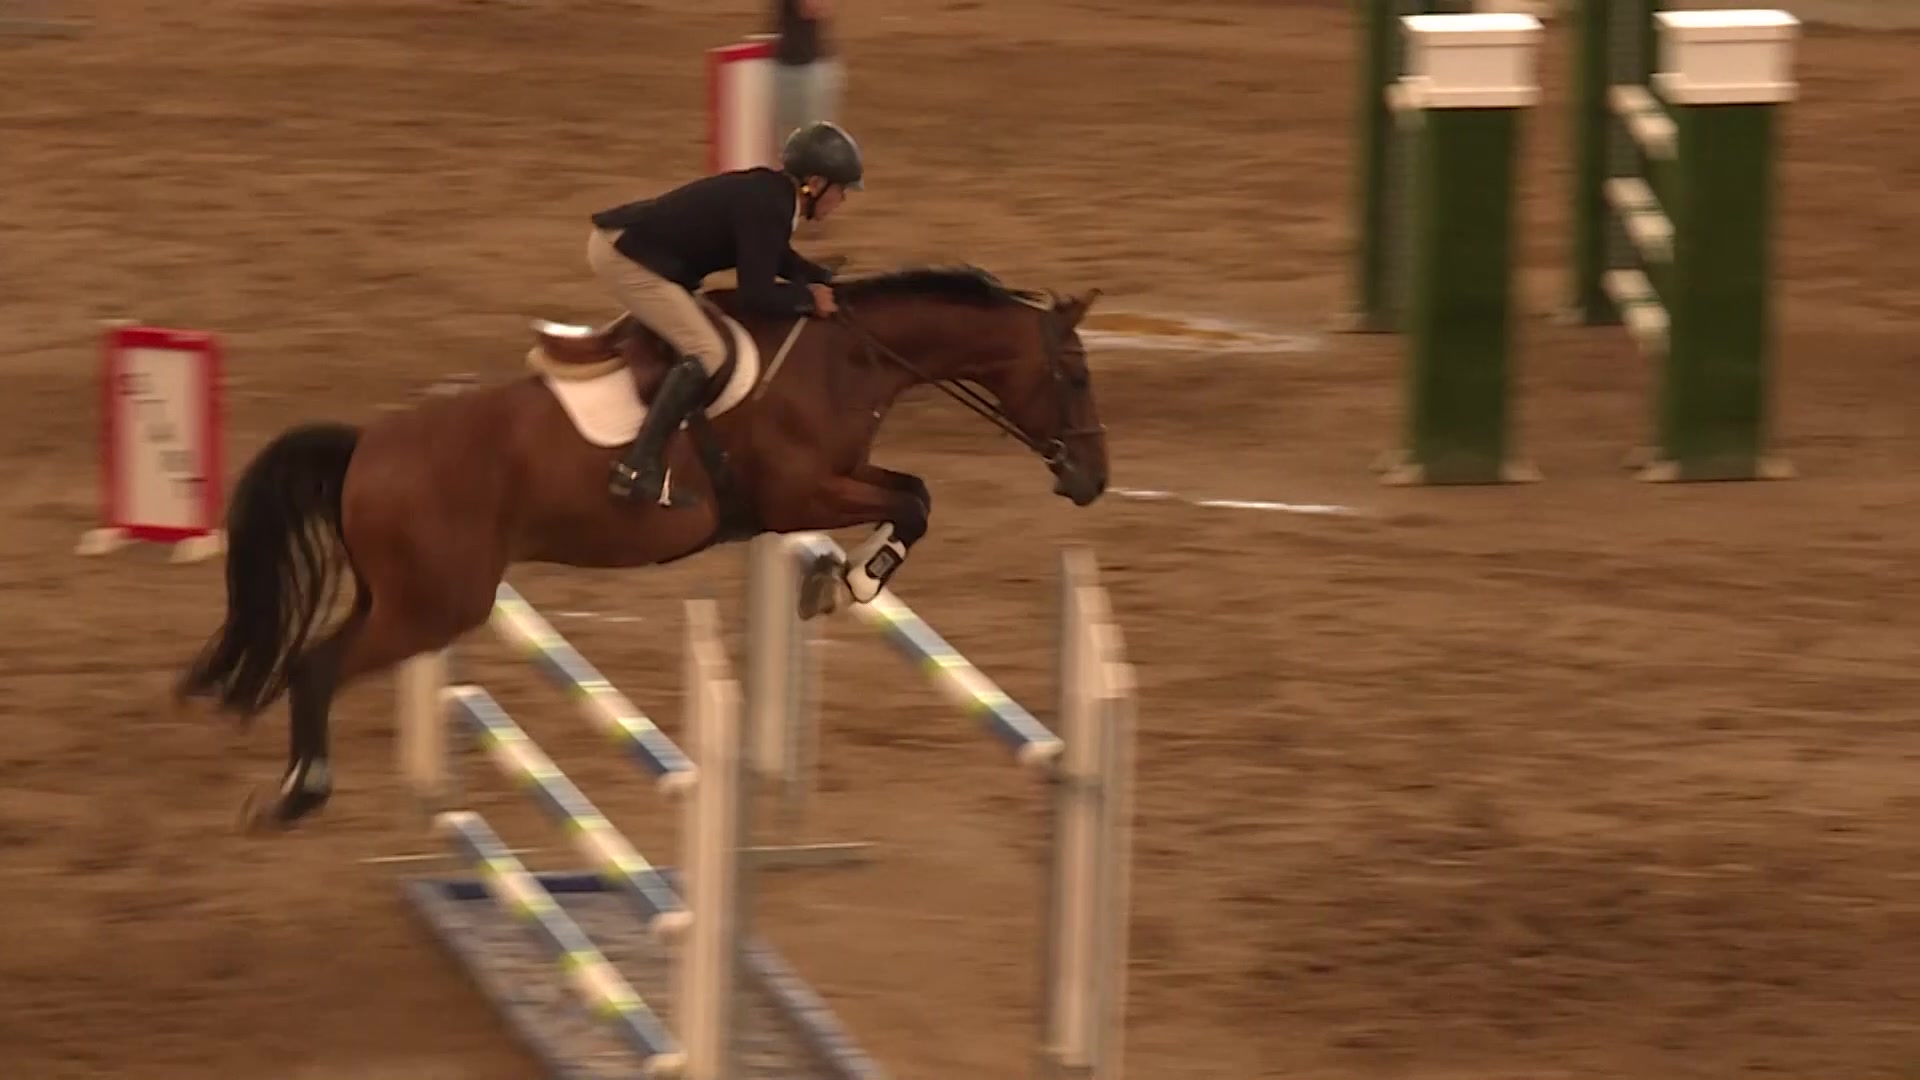 WORLD CUP SHOW JUMPING TO RETURN TO TAMWORTH AFTER HIATUS NBN News